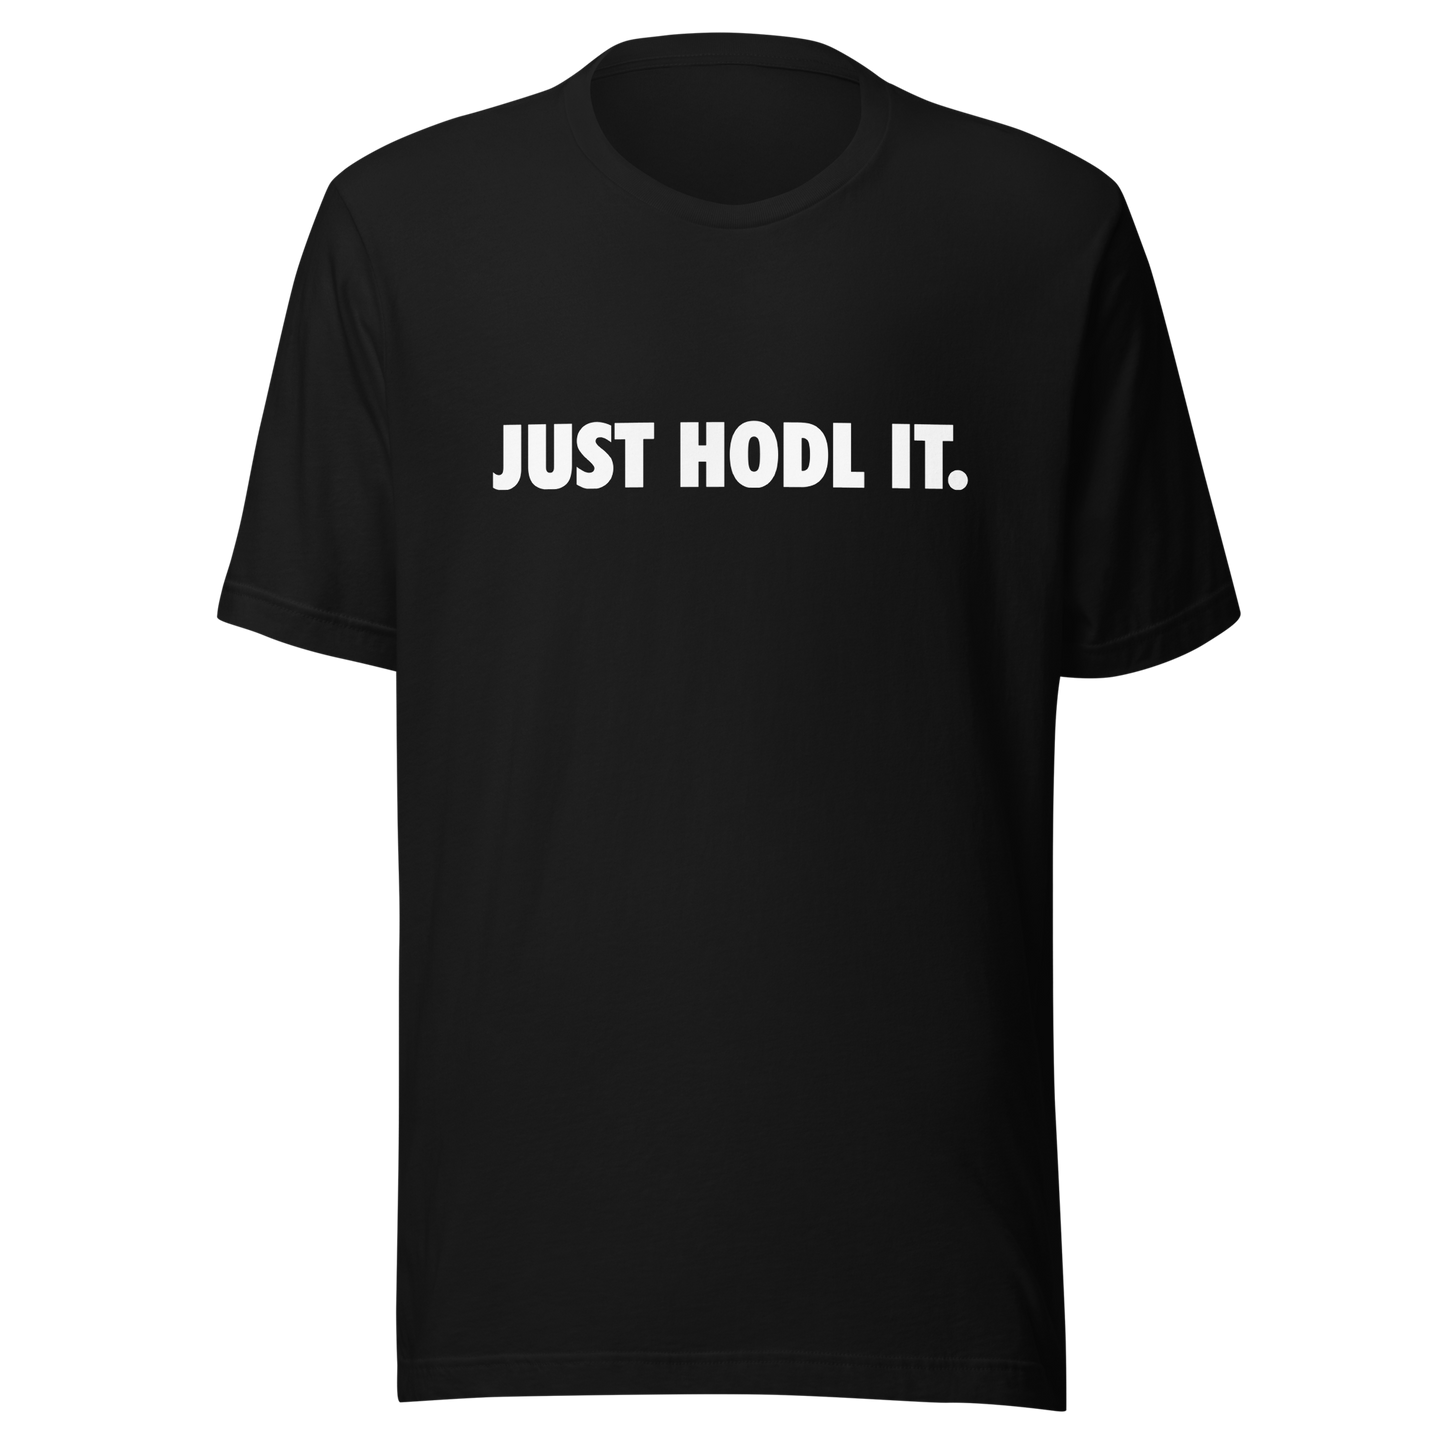 JUST HODL IT.